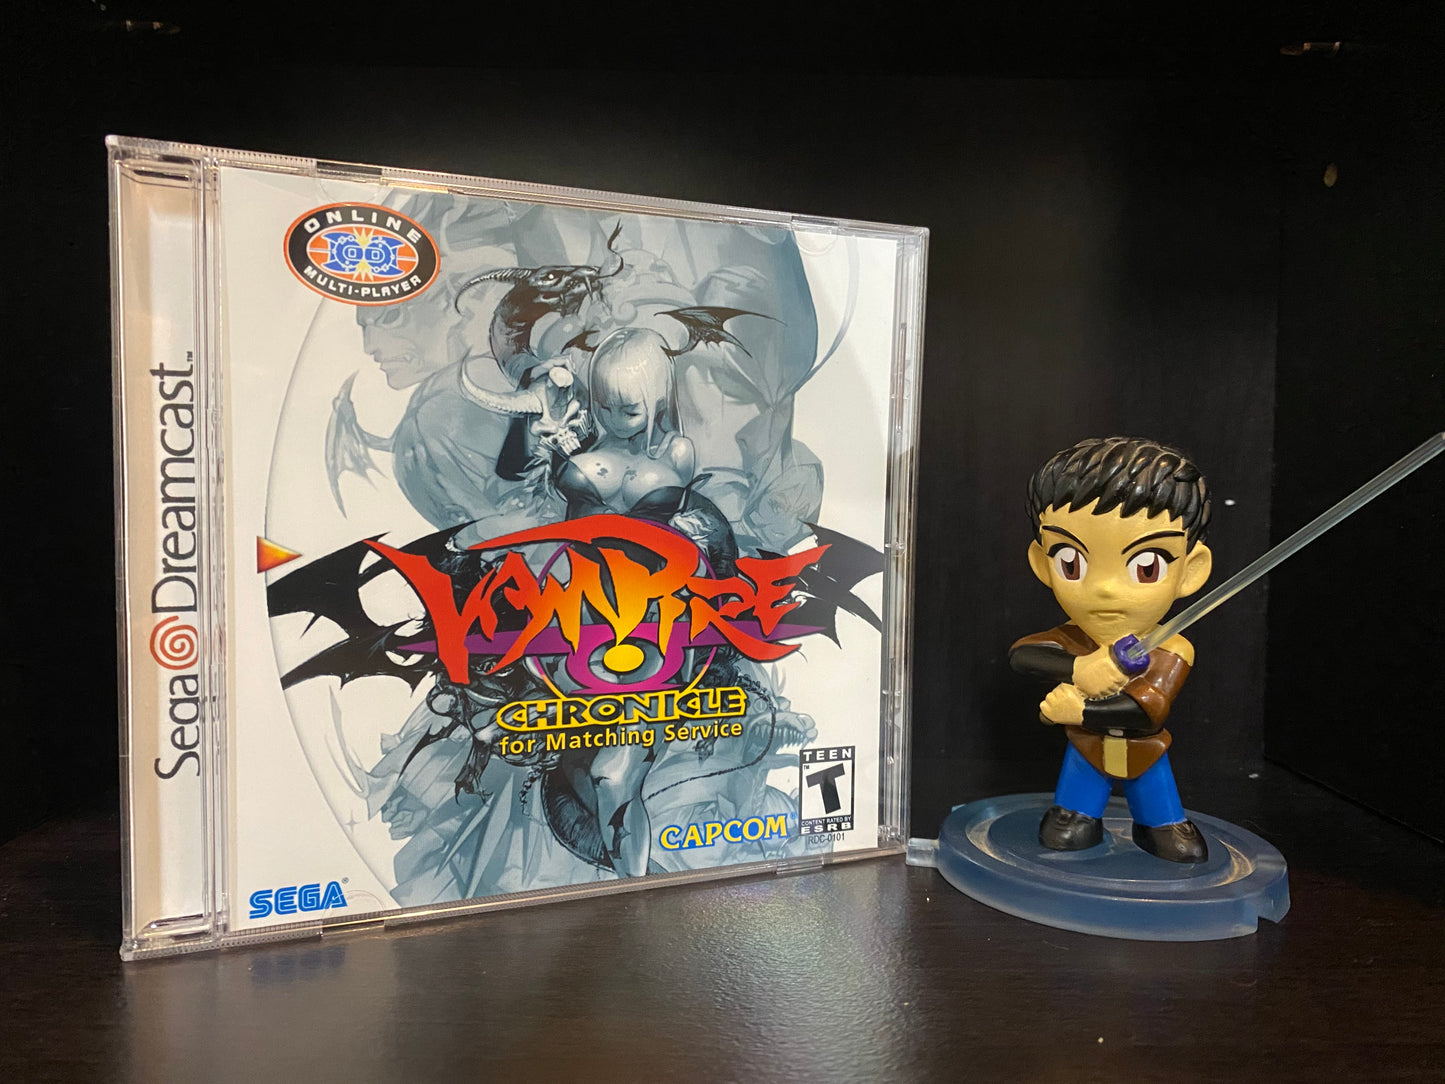 Vampire Chronicle 'For Matching Service' [Sega Dreamcast] Reproduction